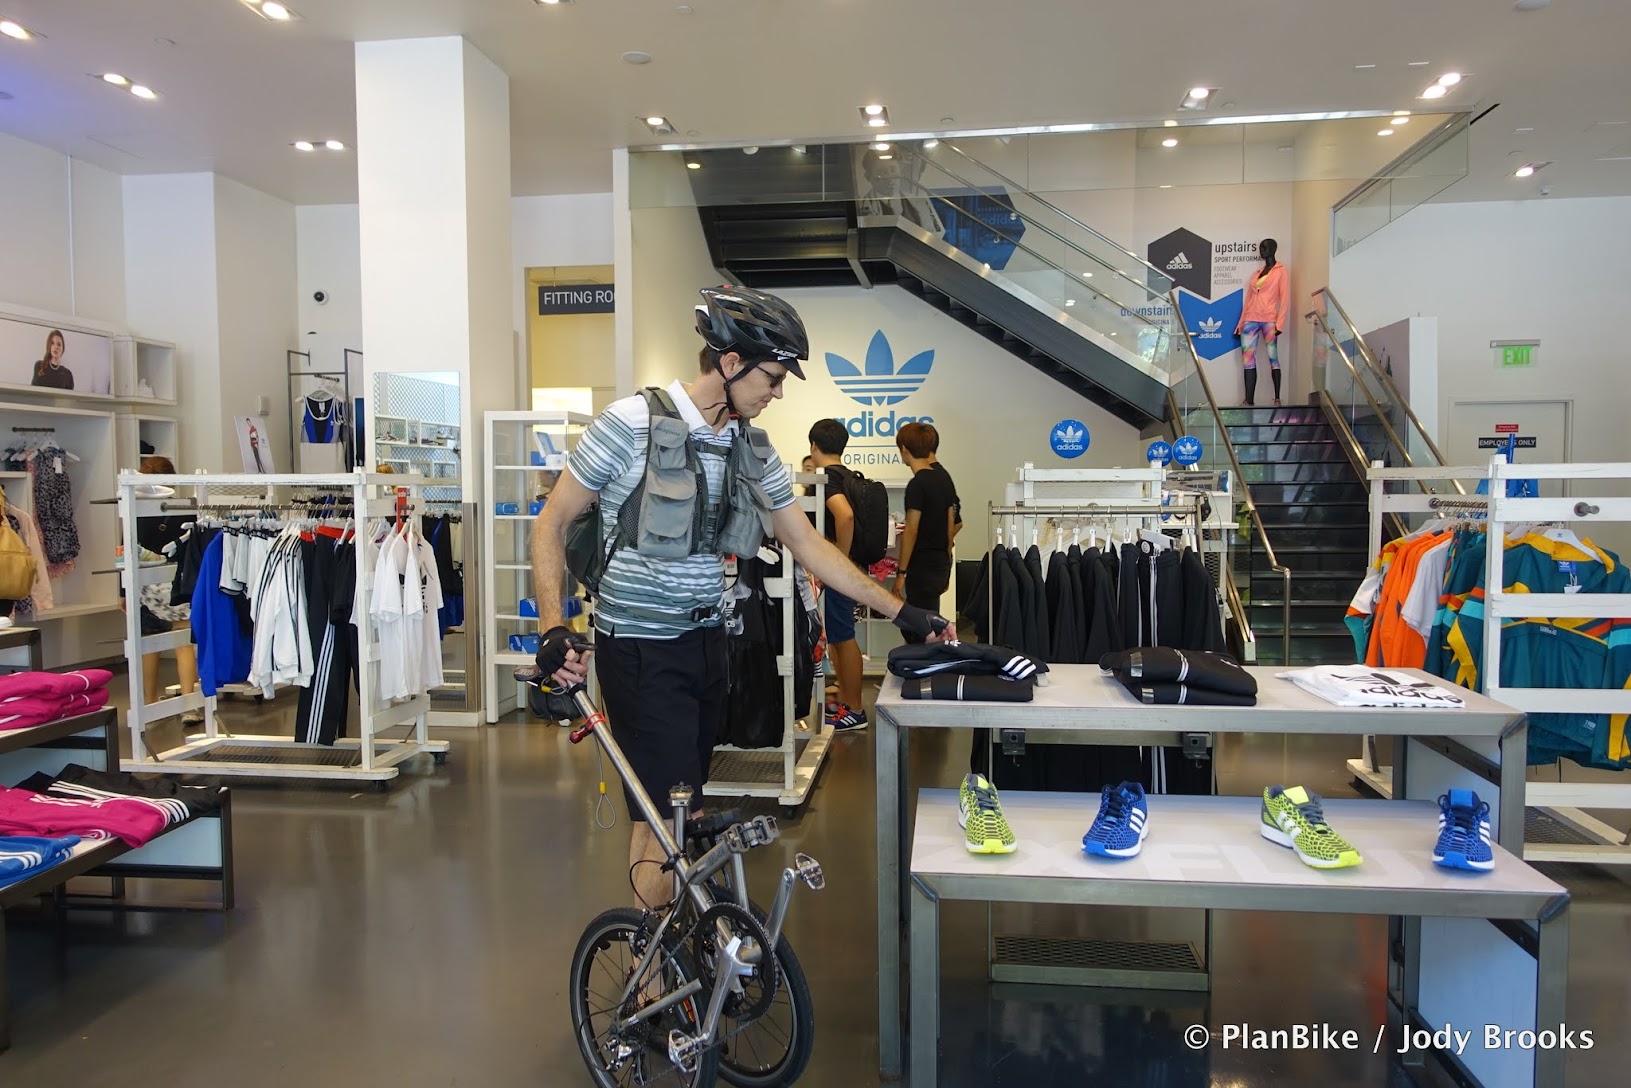 Folding Bikes are welcome in stores.